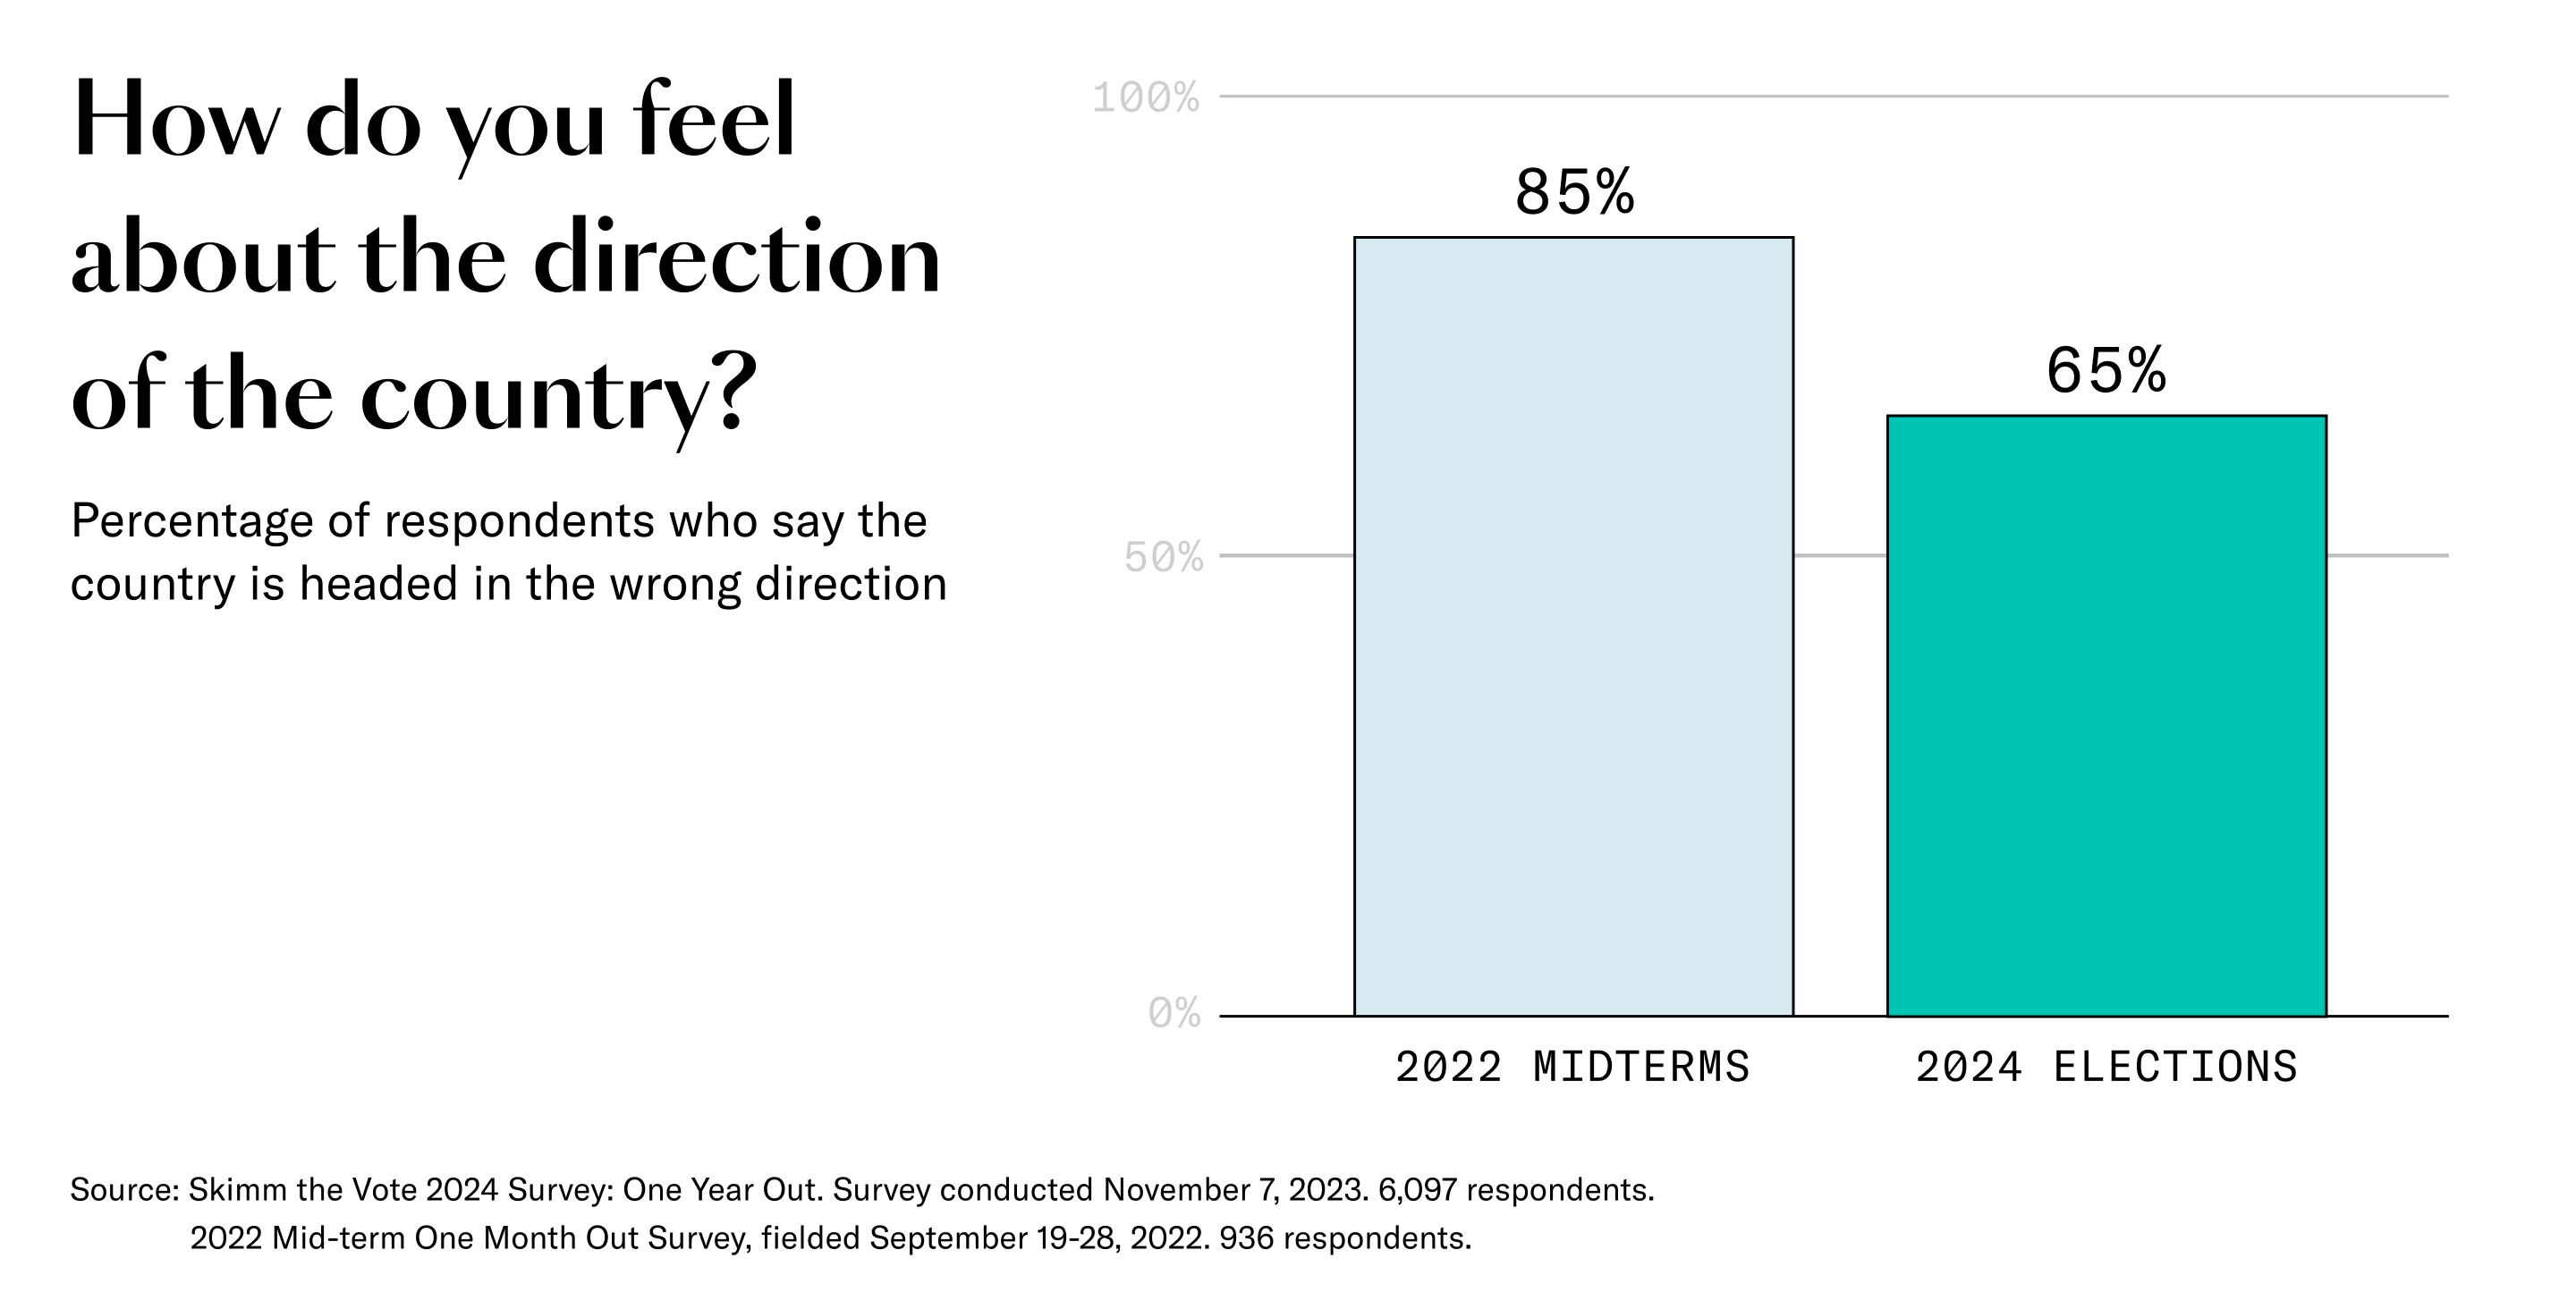 Most Skimm'rs think the country is headed in the wrong direction.